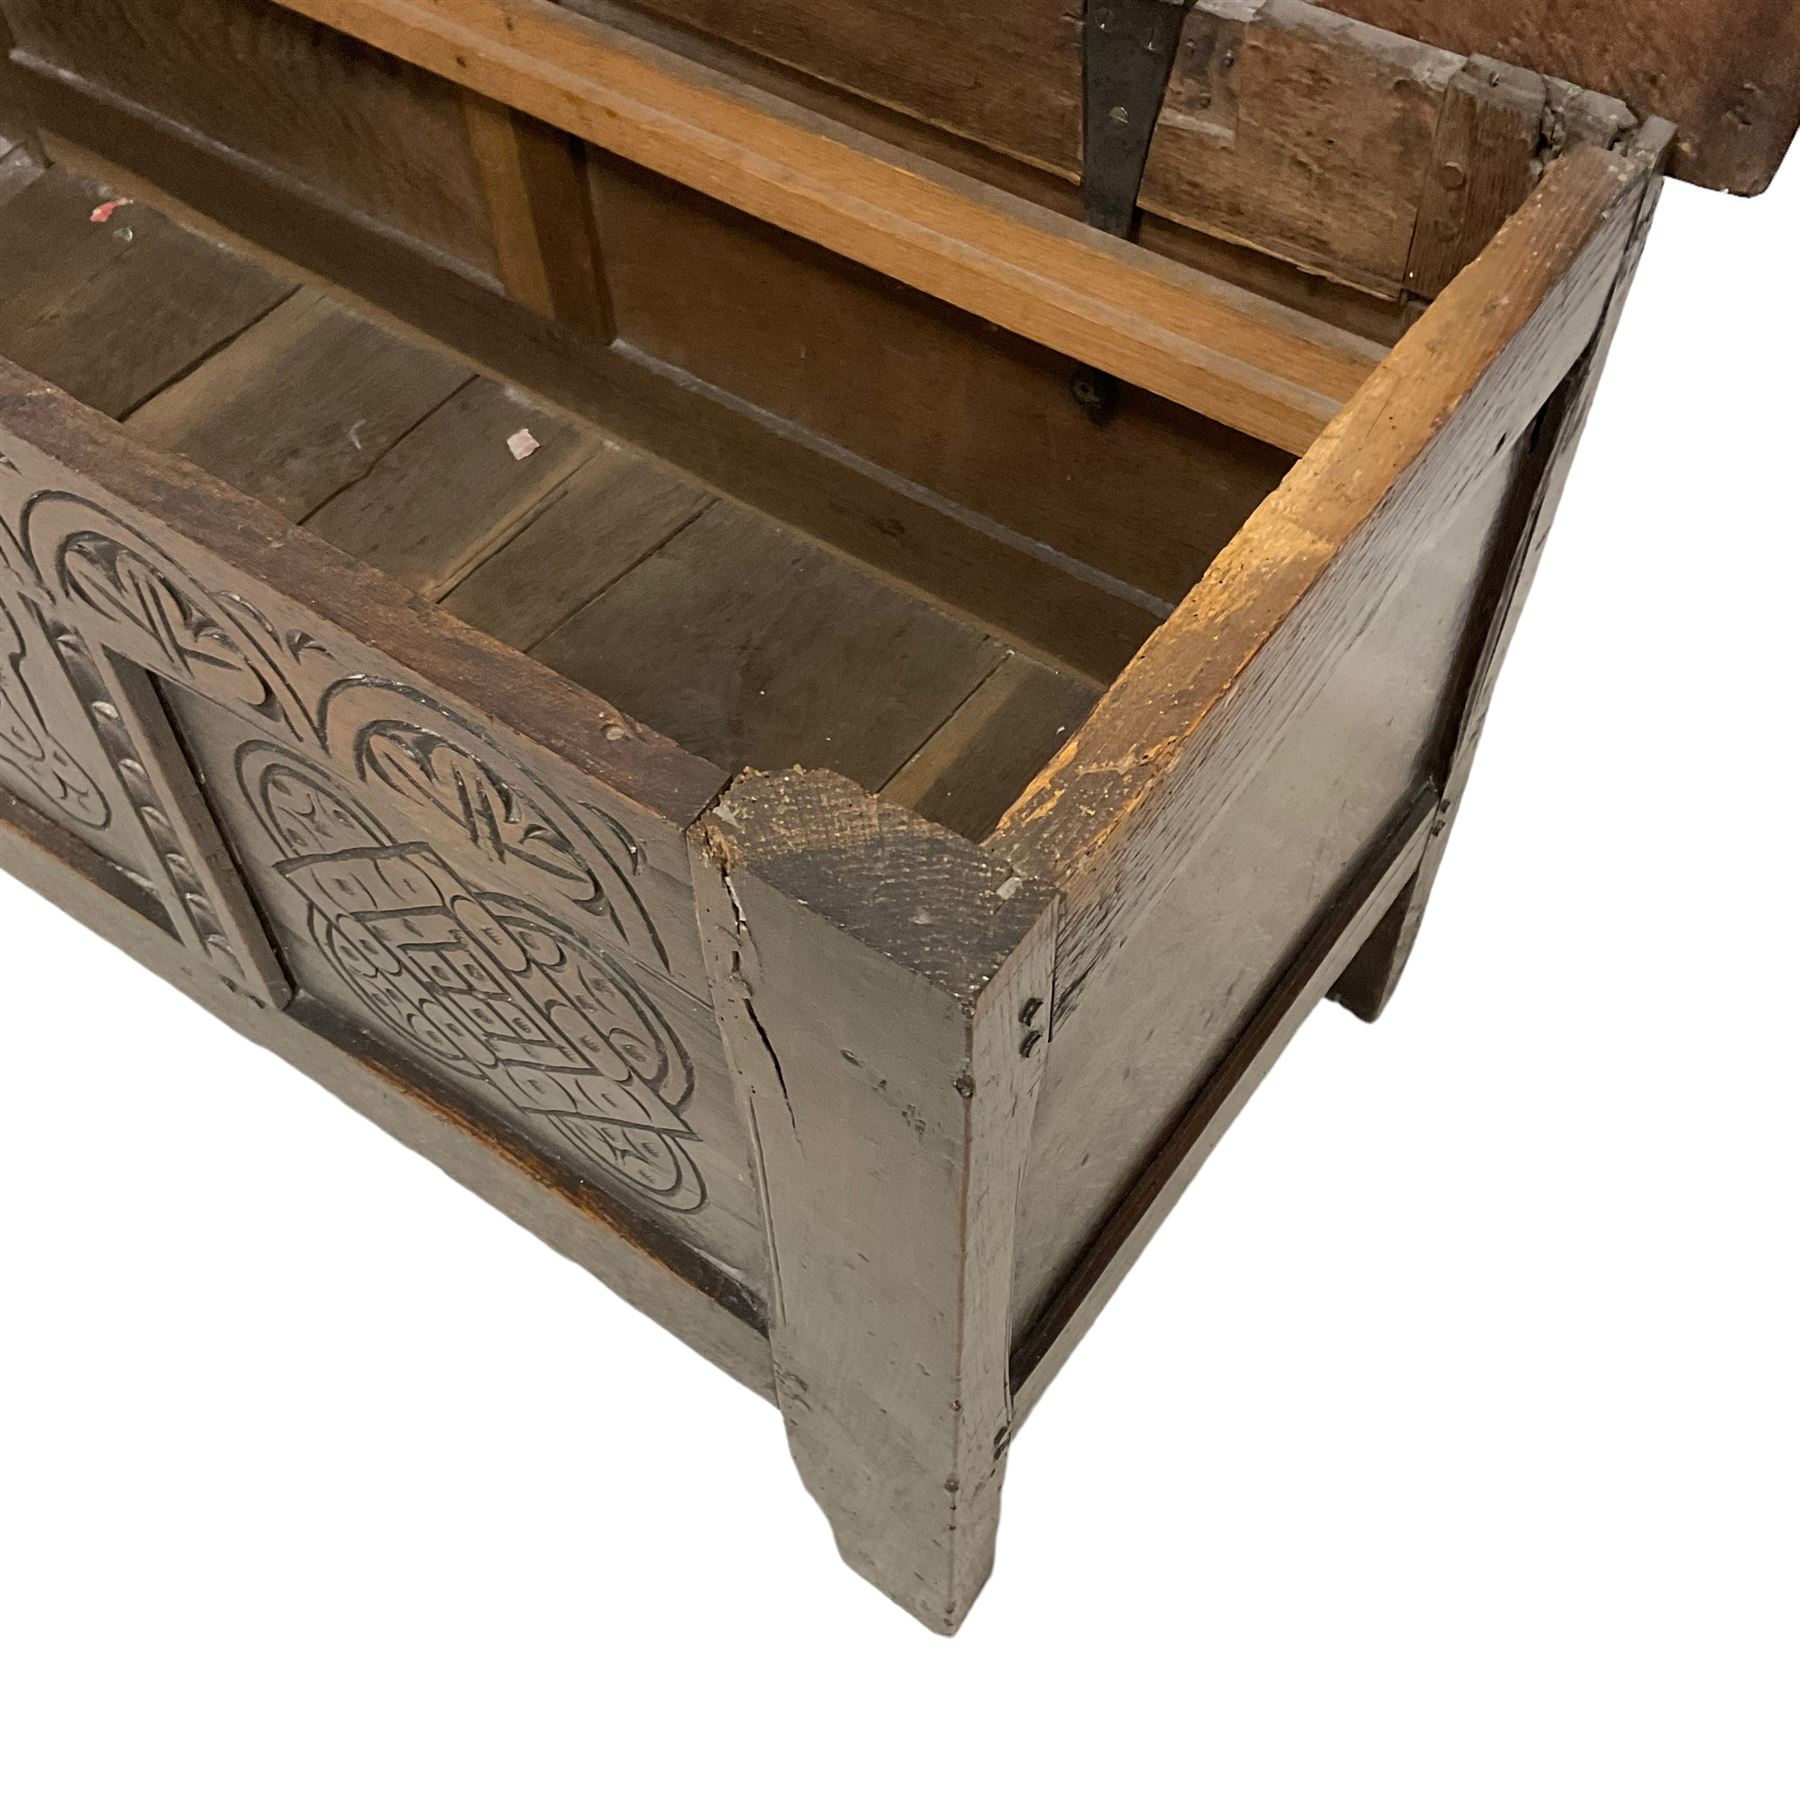 18th century oak coffer or chest - Image 5 of 6